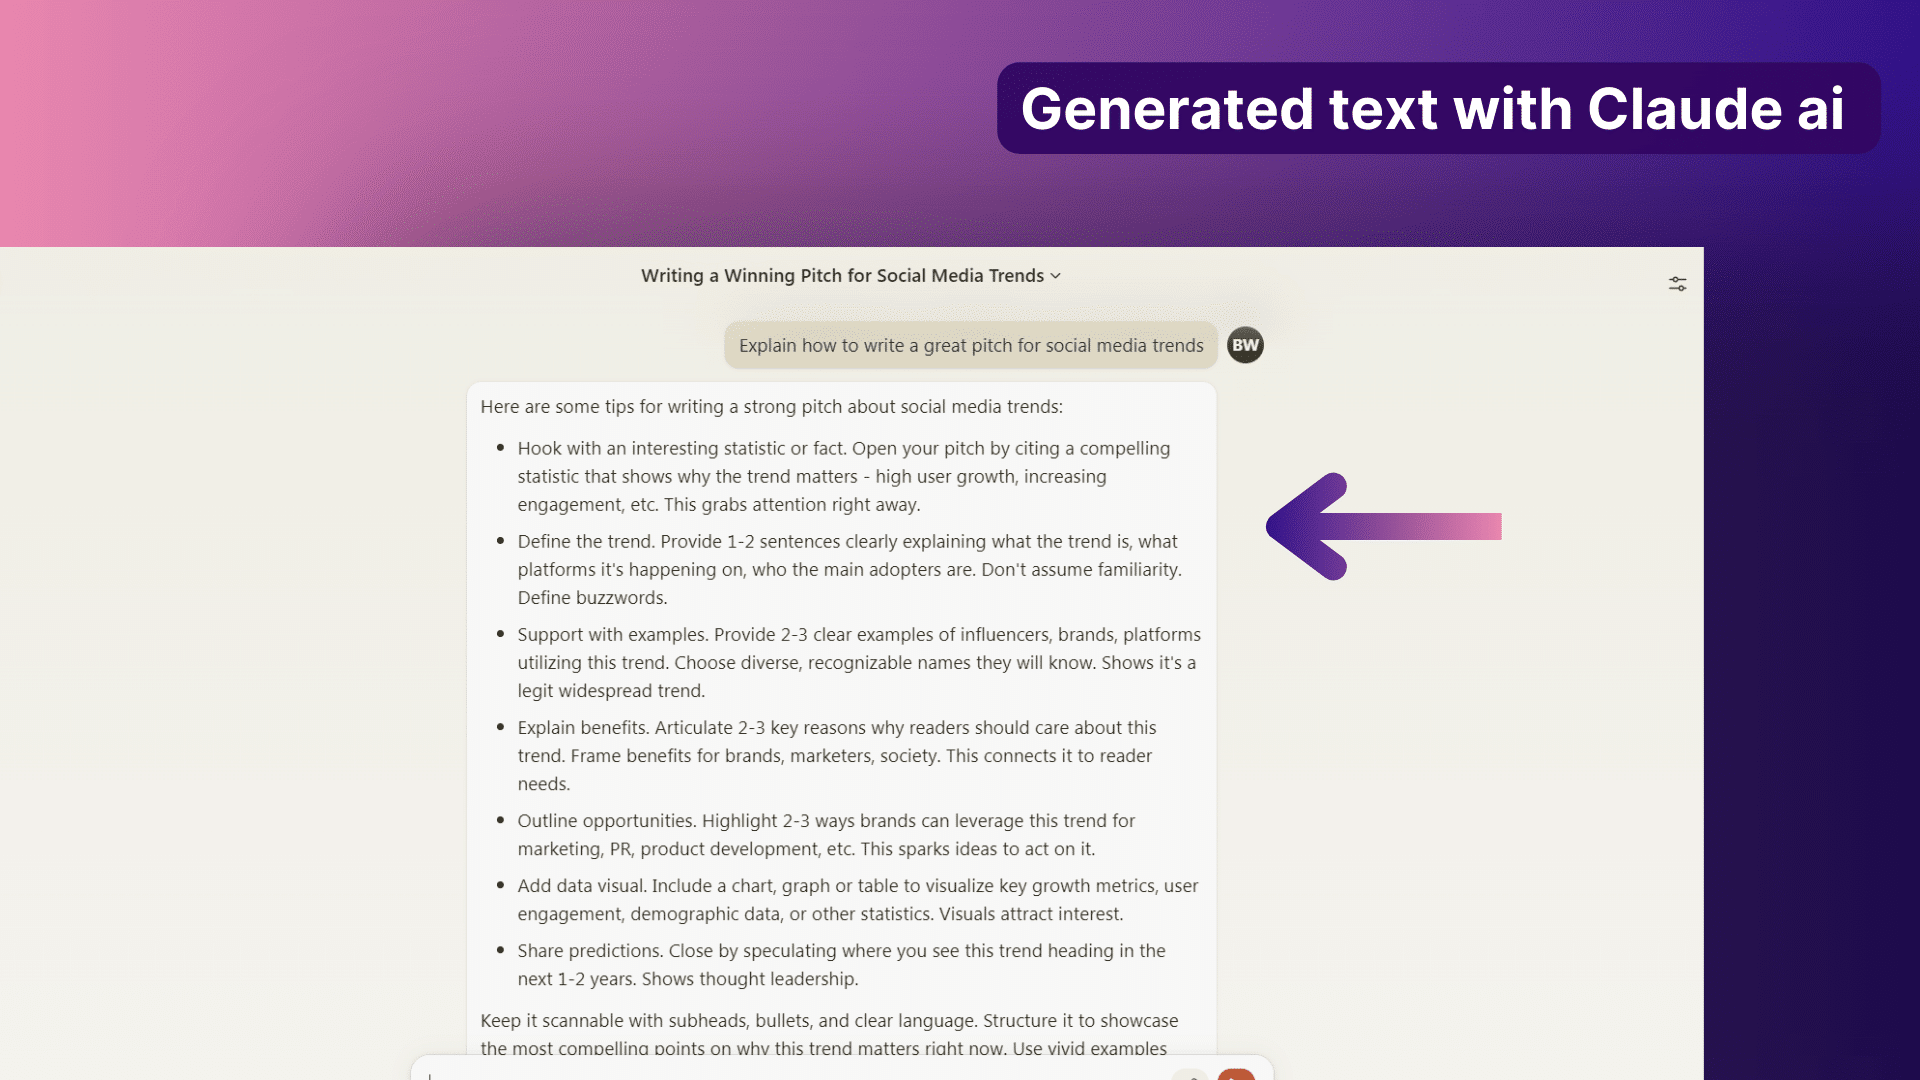 Claude AI to generate the text with arrow pointing to generated text